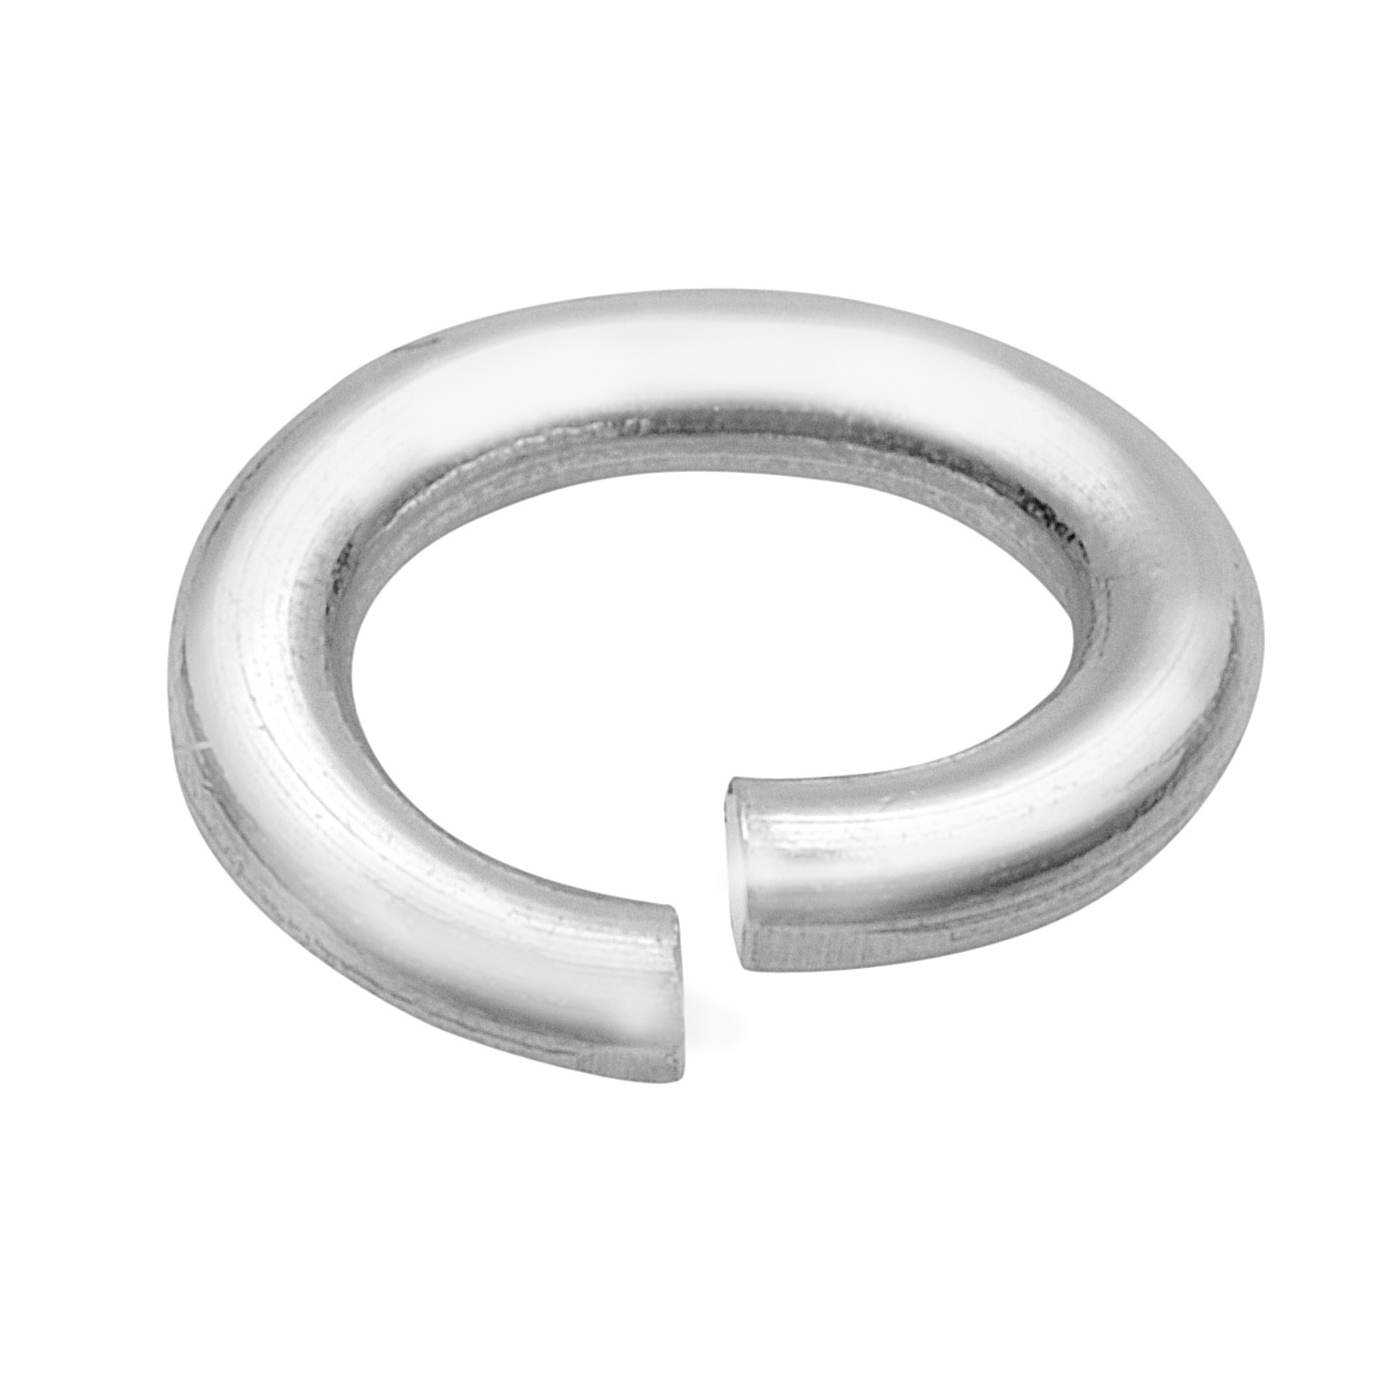 Binding Rings, oval, 925Ag, ø 5 mm - 10 pieces